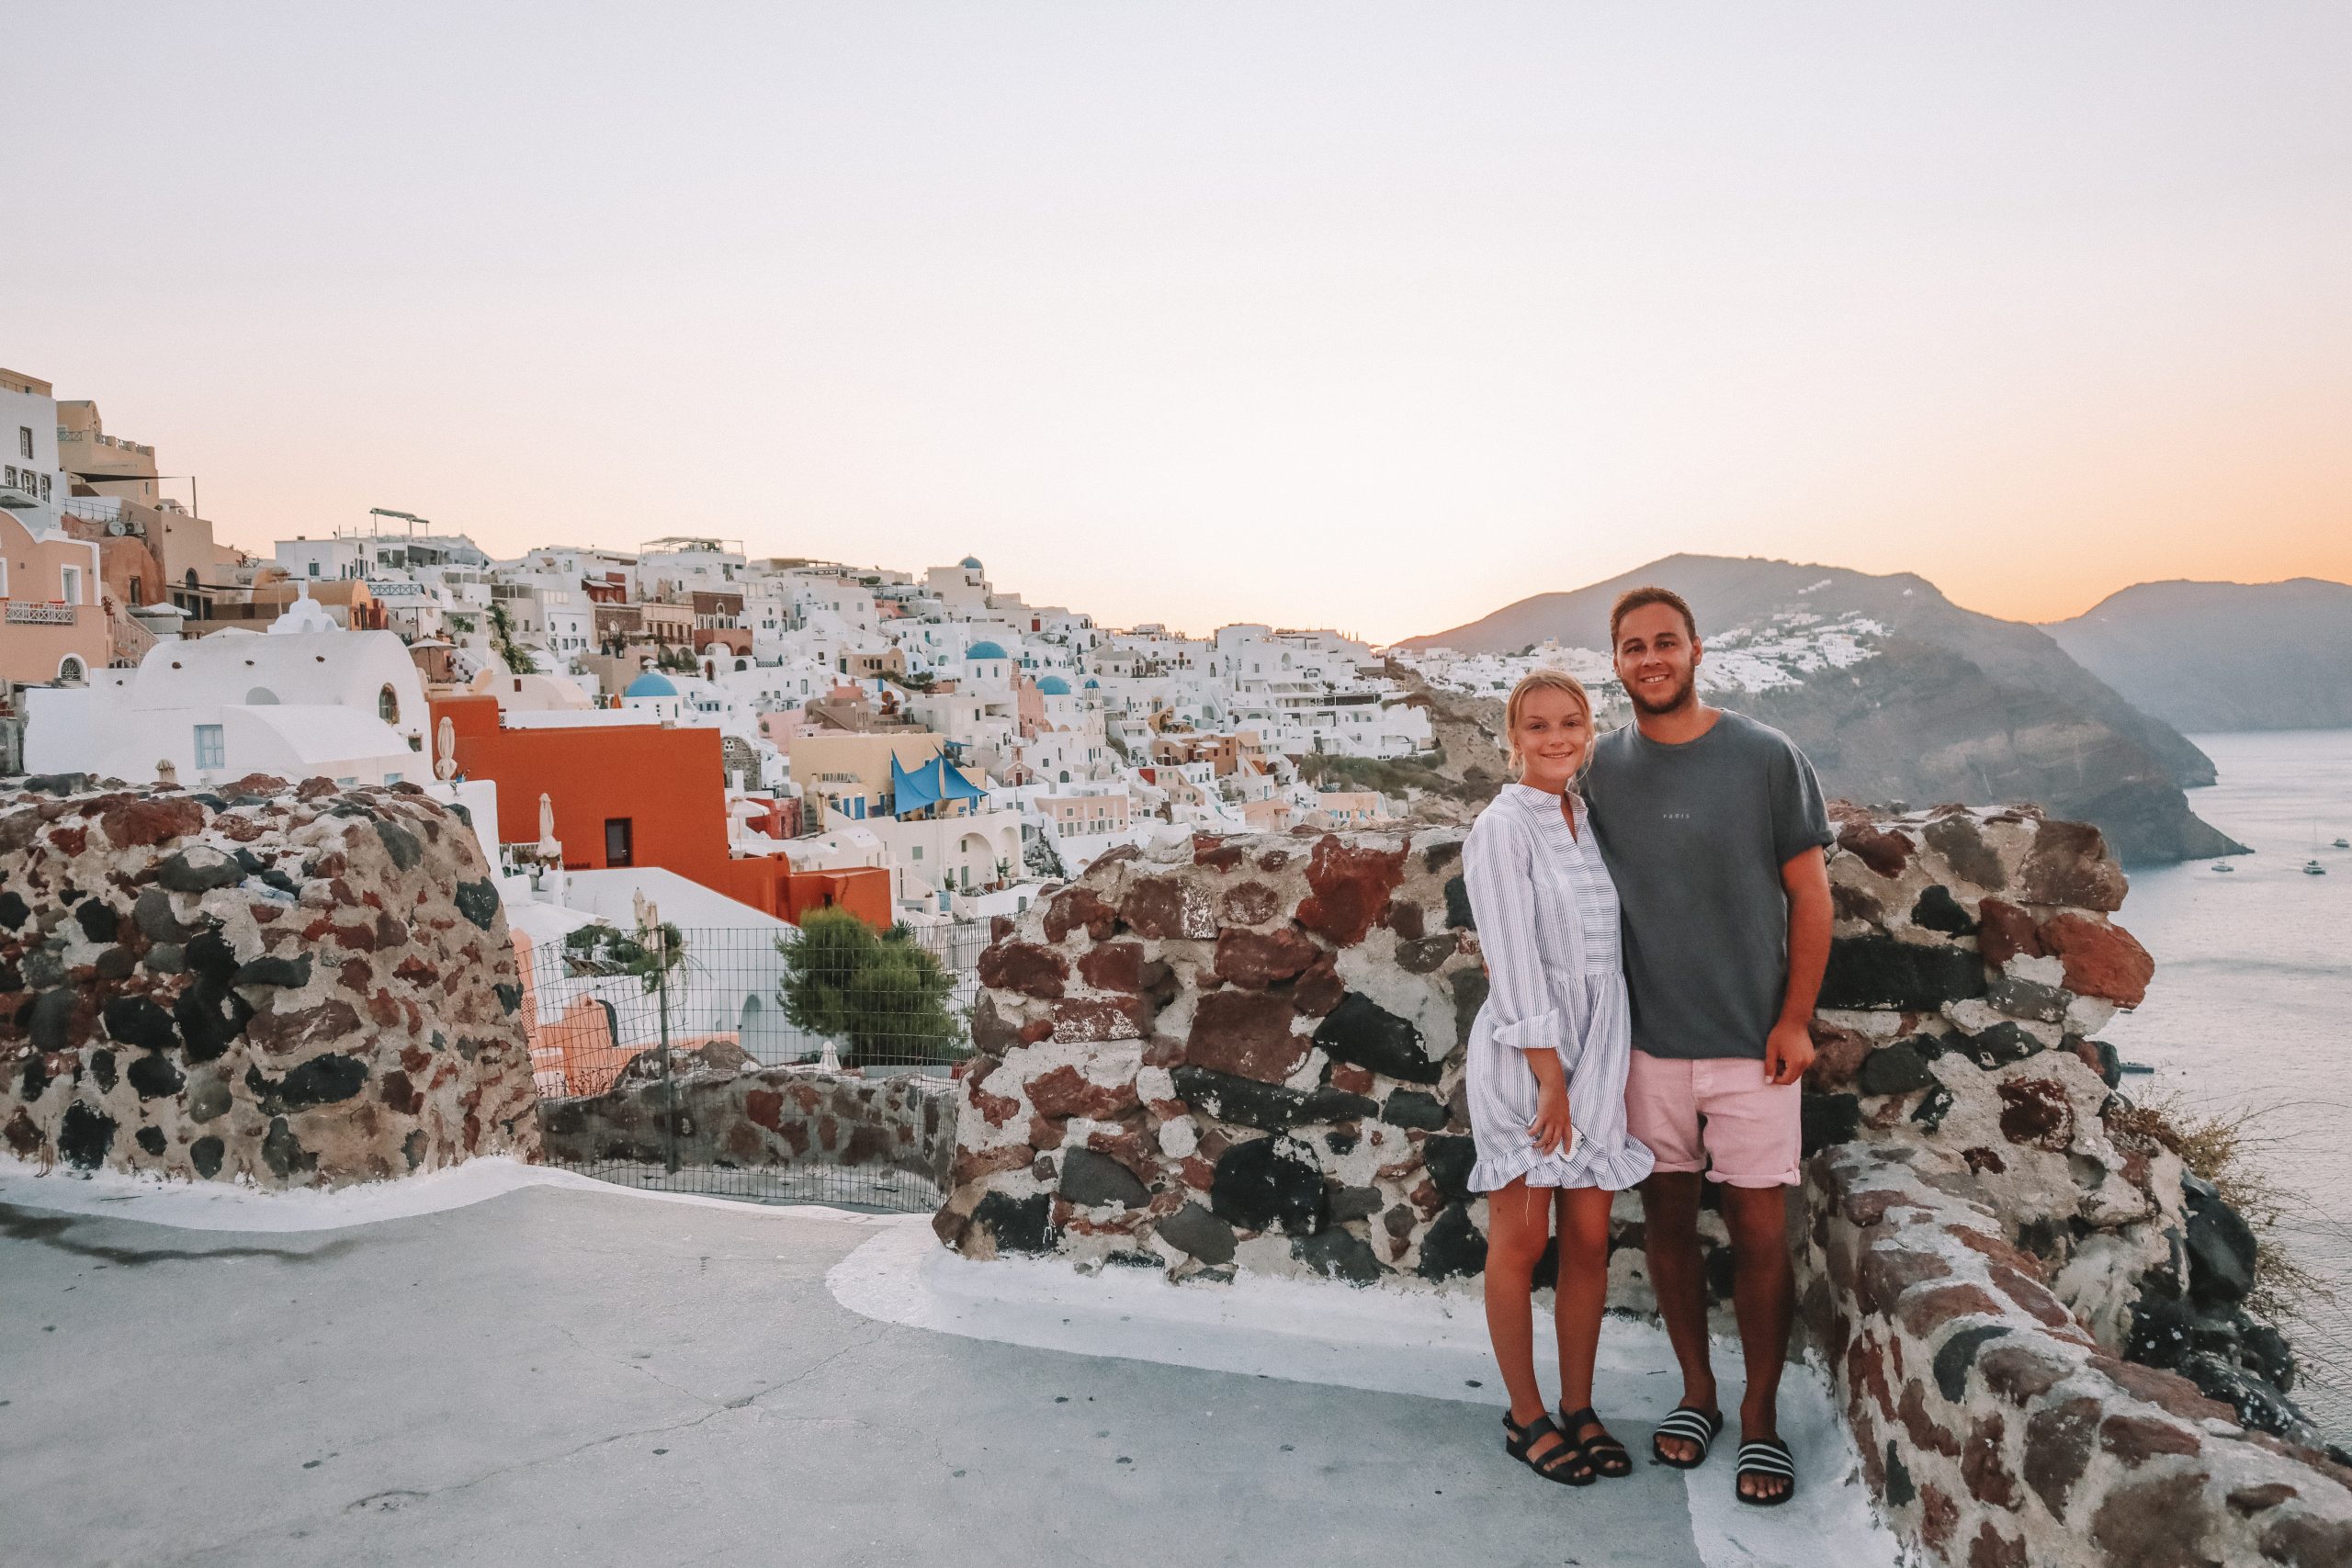 A view from the Kastro in Oia during sunrise with blue domed churches in the background